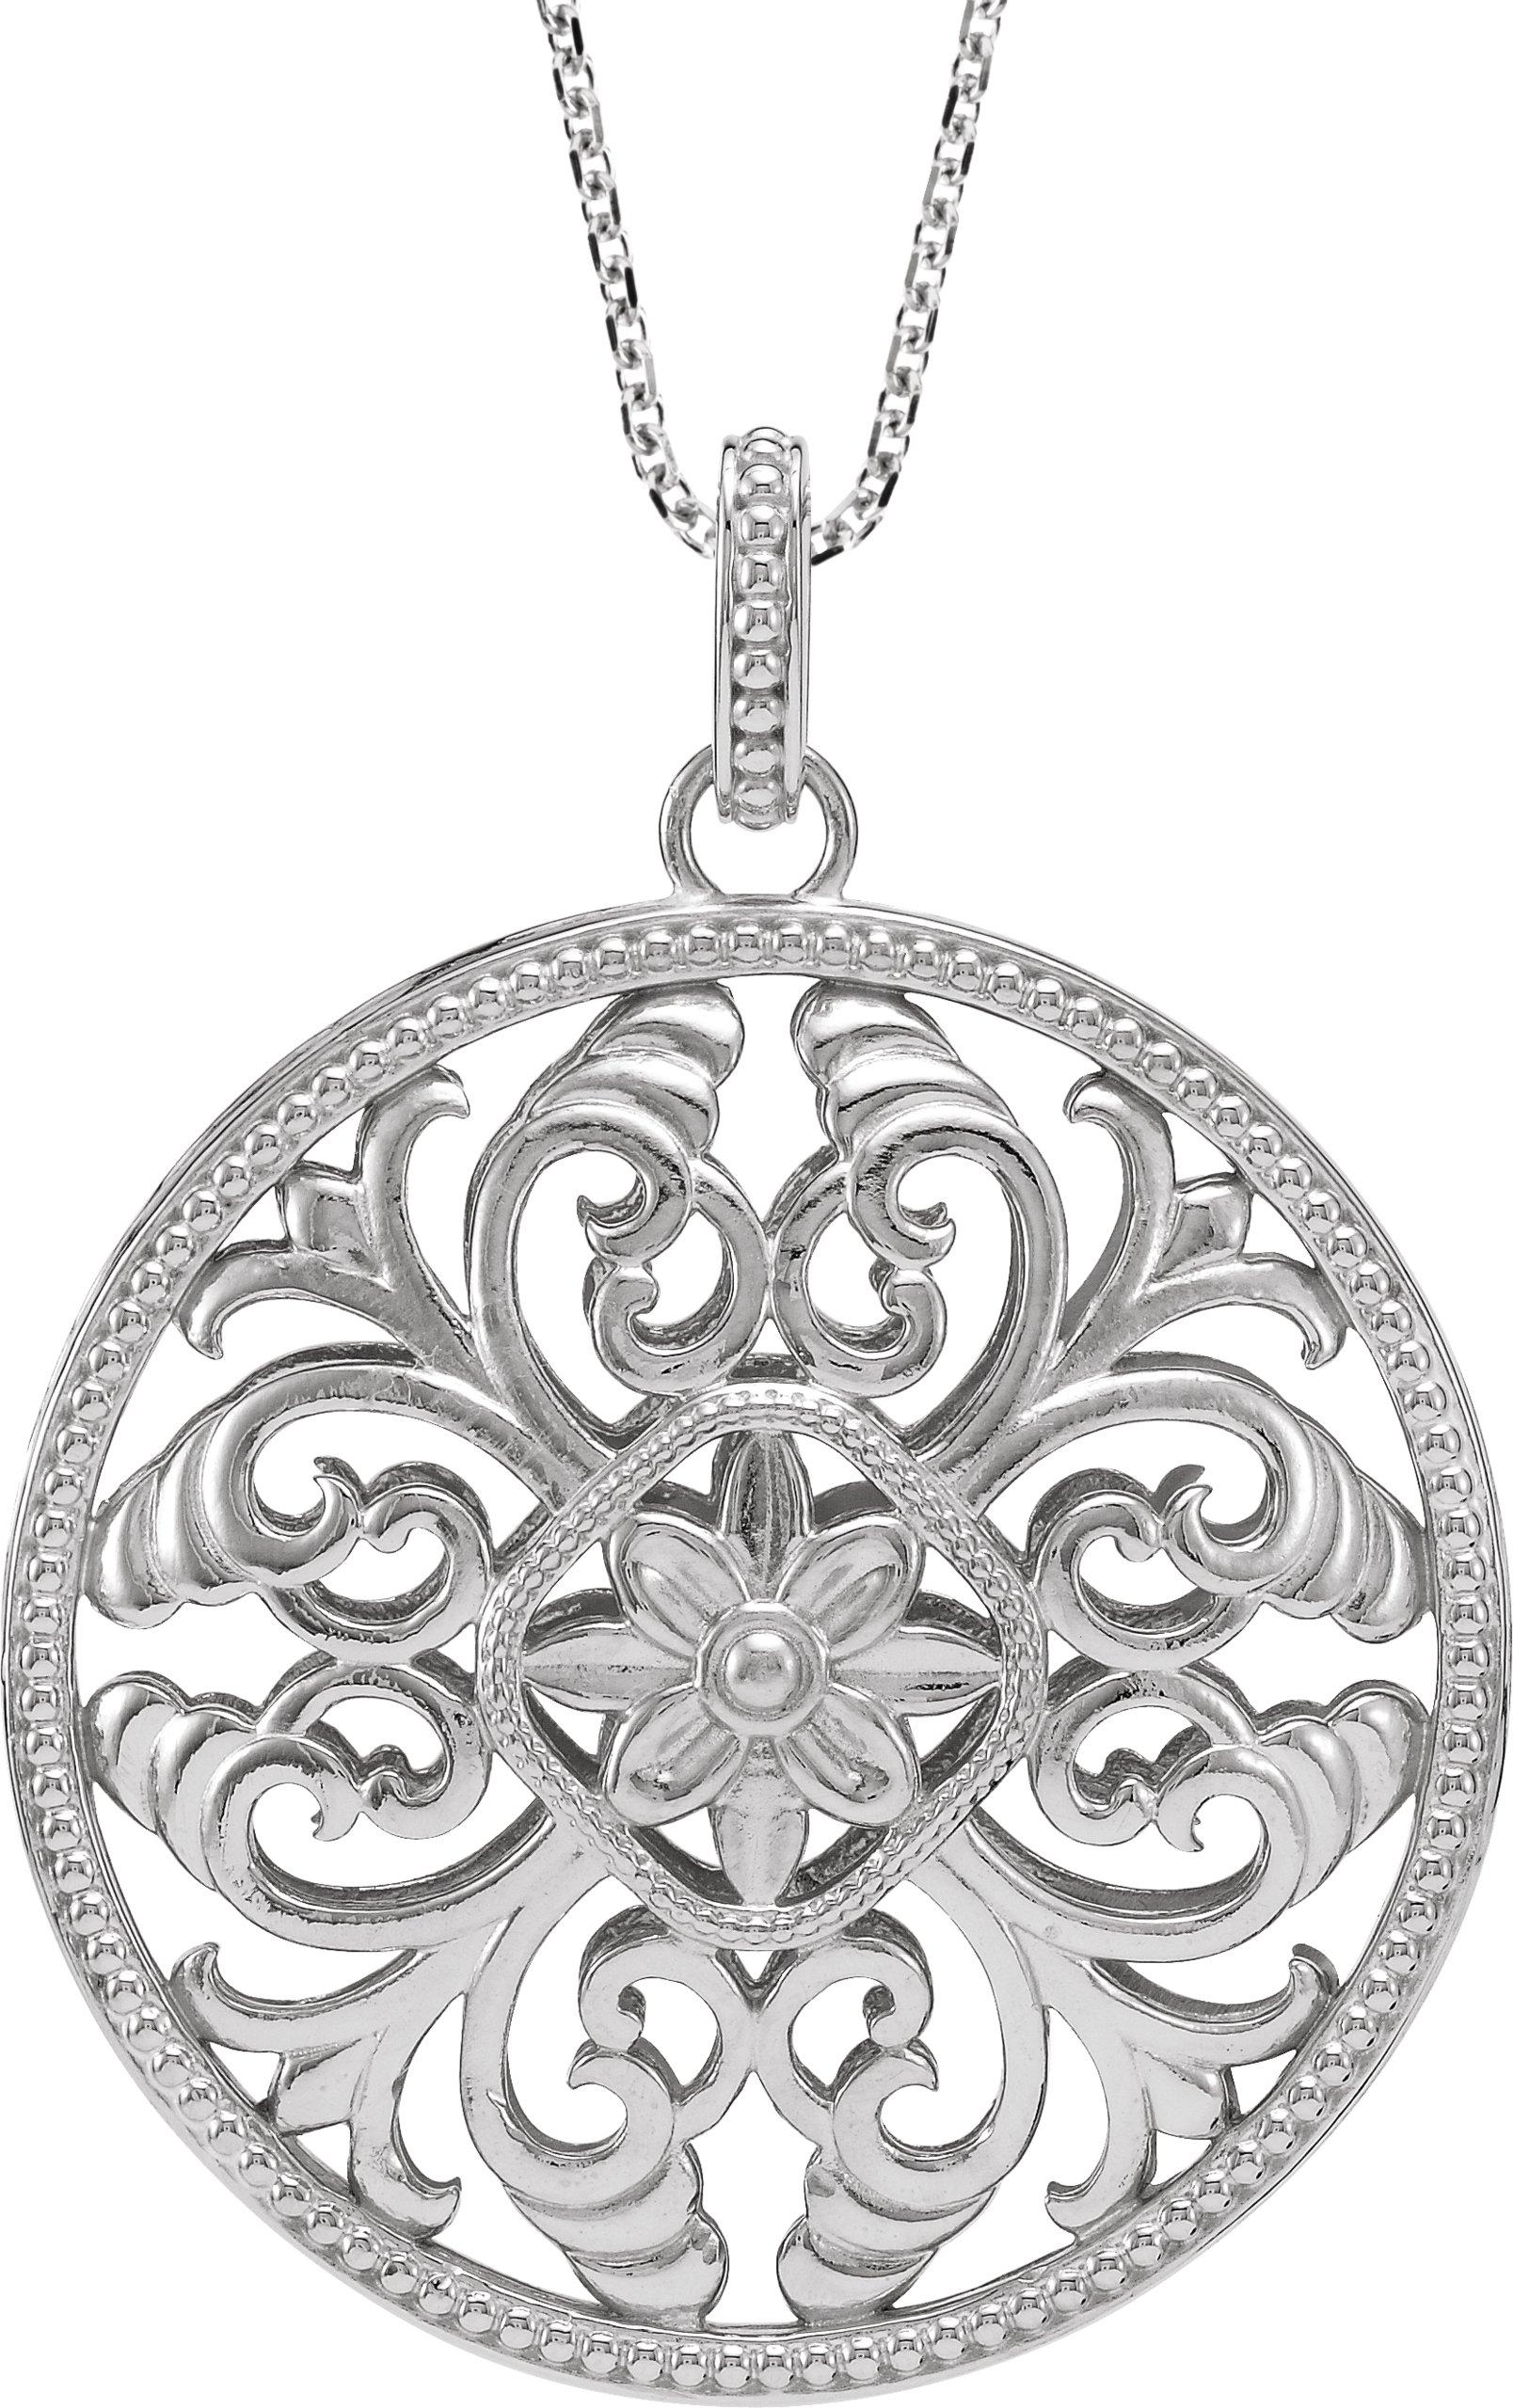 Sterling Silver Filigree Circle 18 inch Necklace Ref. 3409749